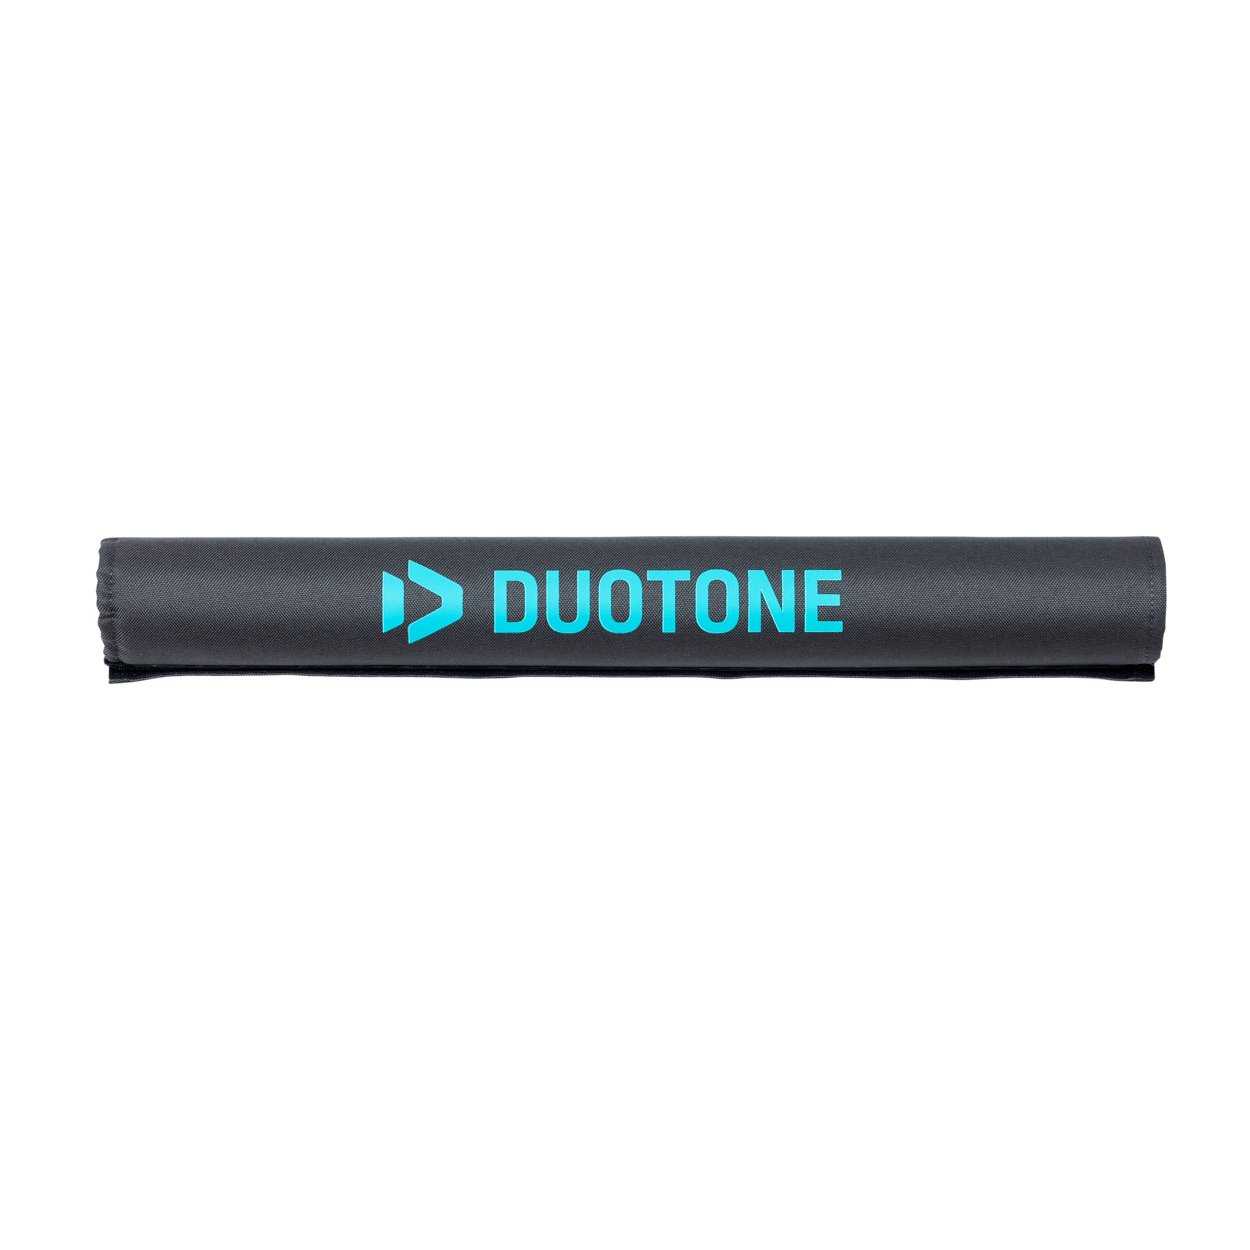 Duotone Roof-Rack Pads 2024 - Worthing Watersports - 9008415843886 - Tuning Parts - Duotone Windsurfing